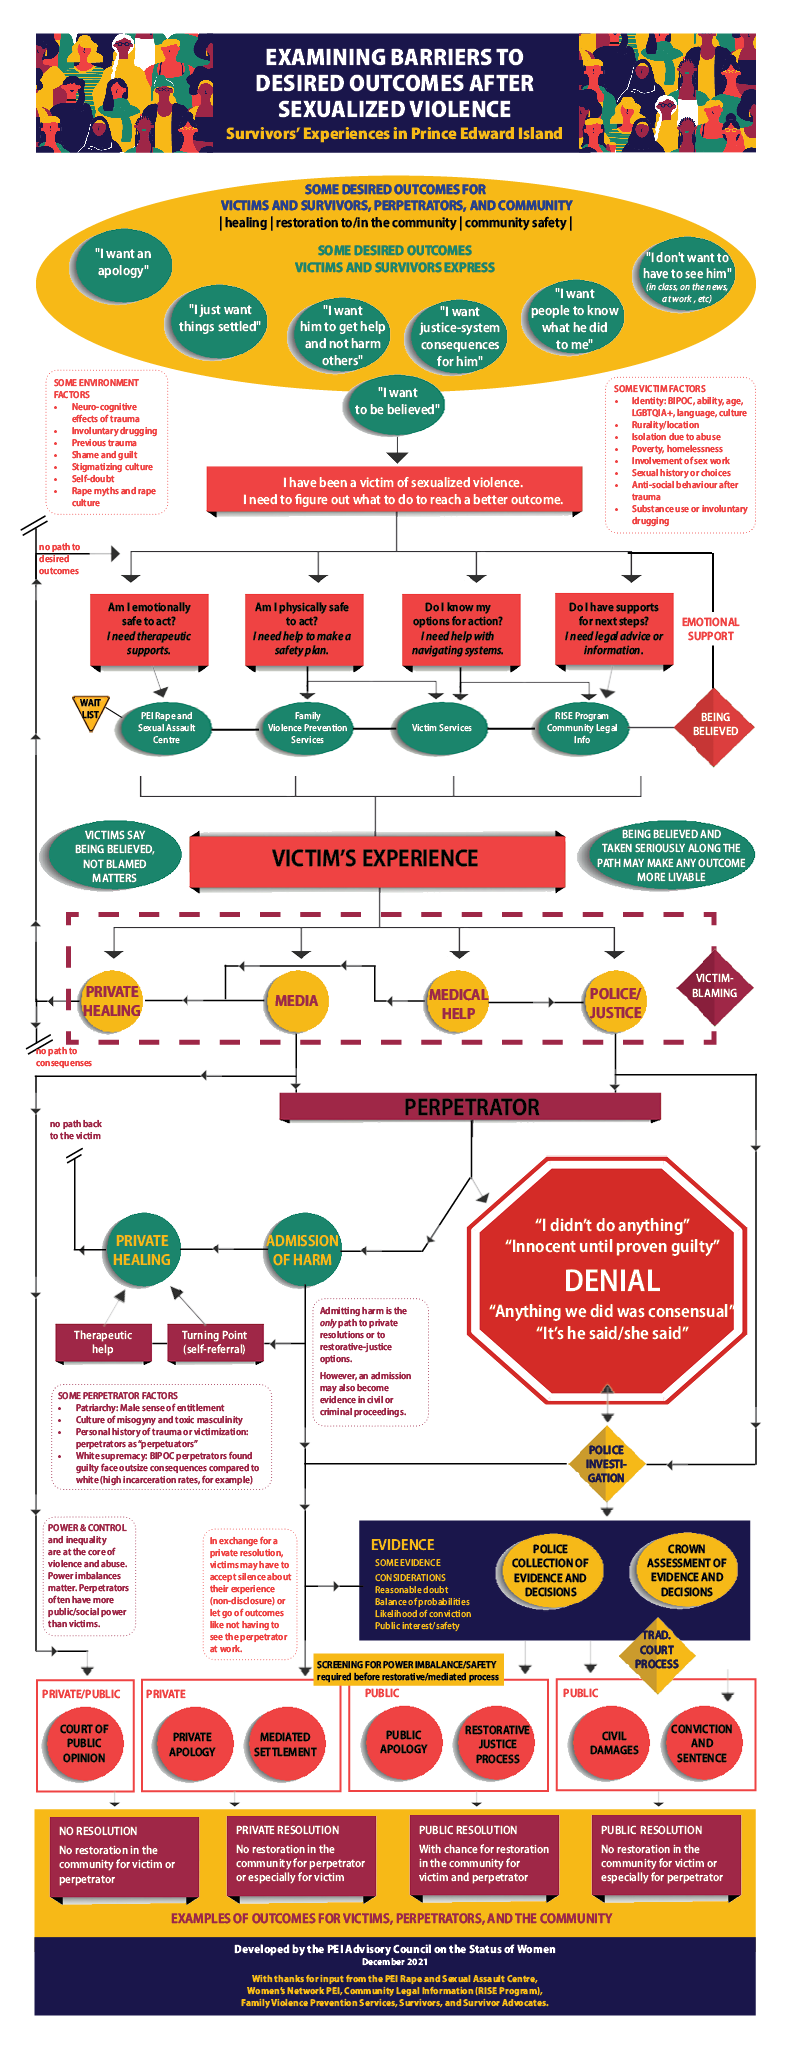 Infographic/flowchart of barriers to desired outcomes after sexualized violence